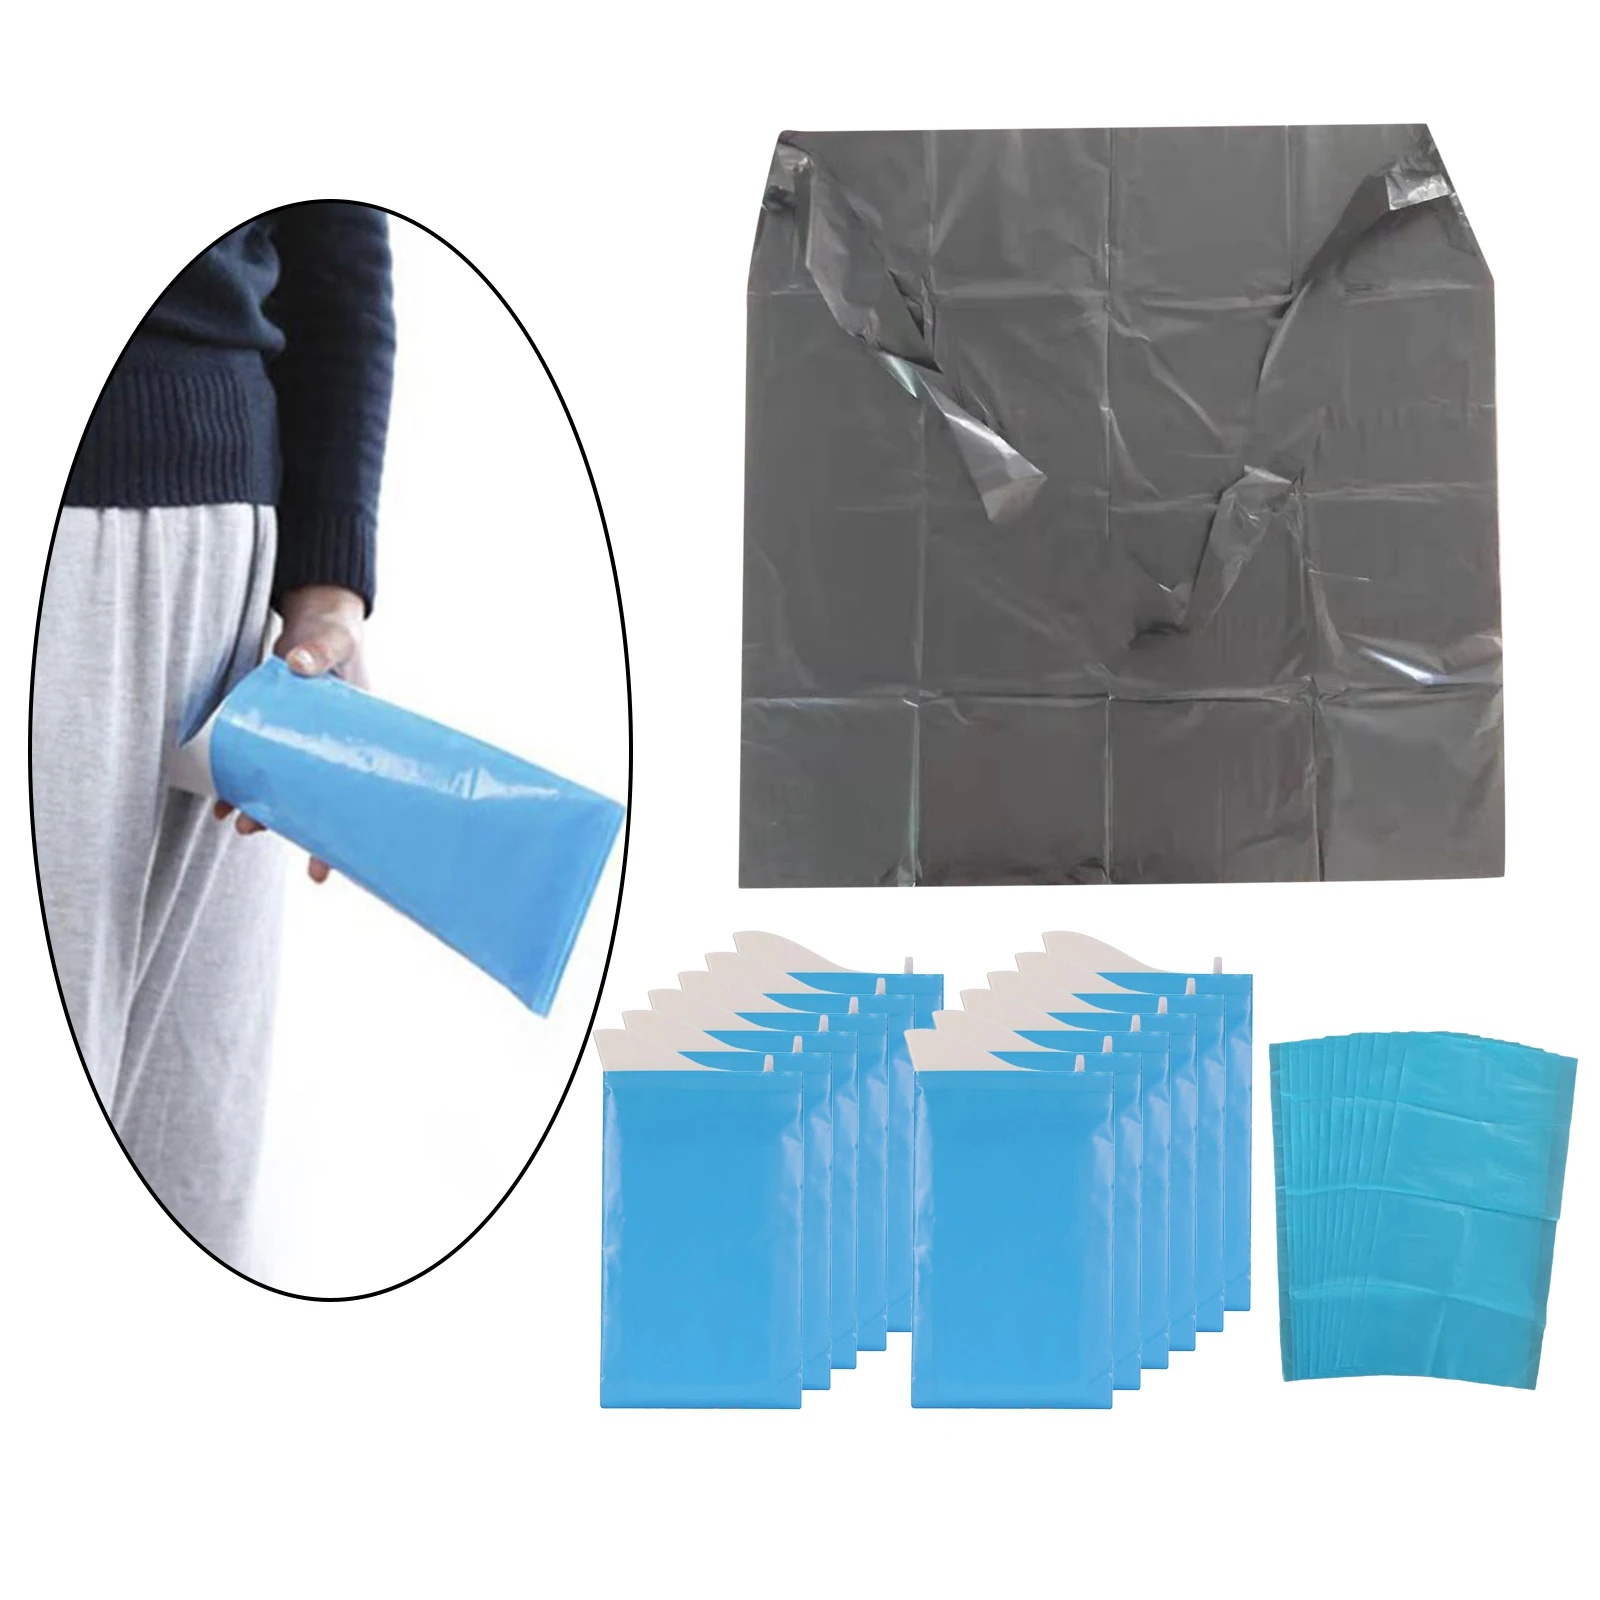 12x Unisex Disposable Urine Bags Women Men Camping Pee Bags Toilet Traffic Crowd for Adults Kids Outdoor Seasick Car Hiking